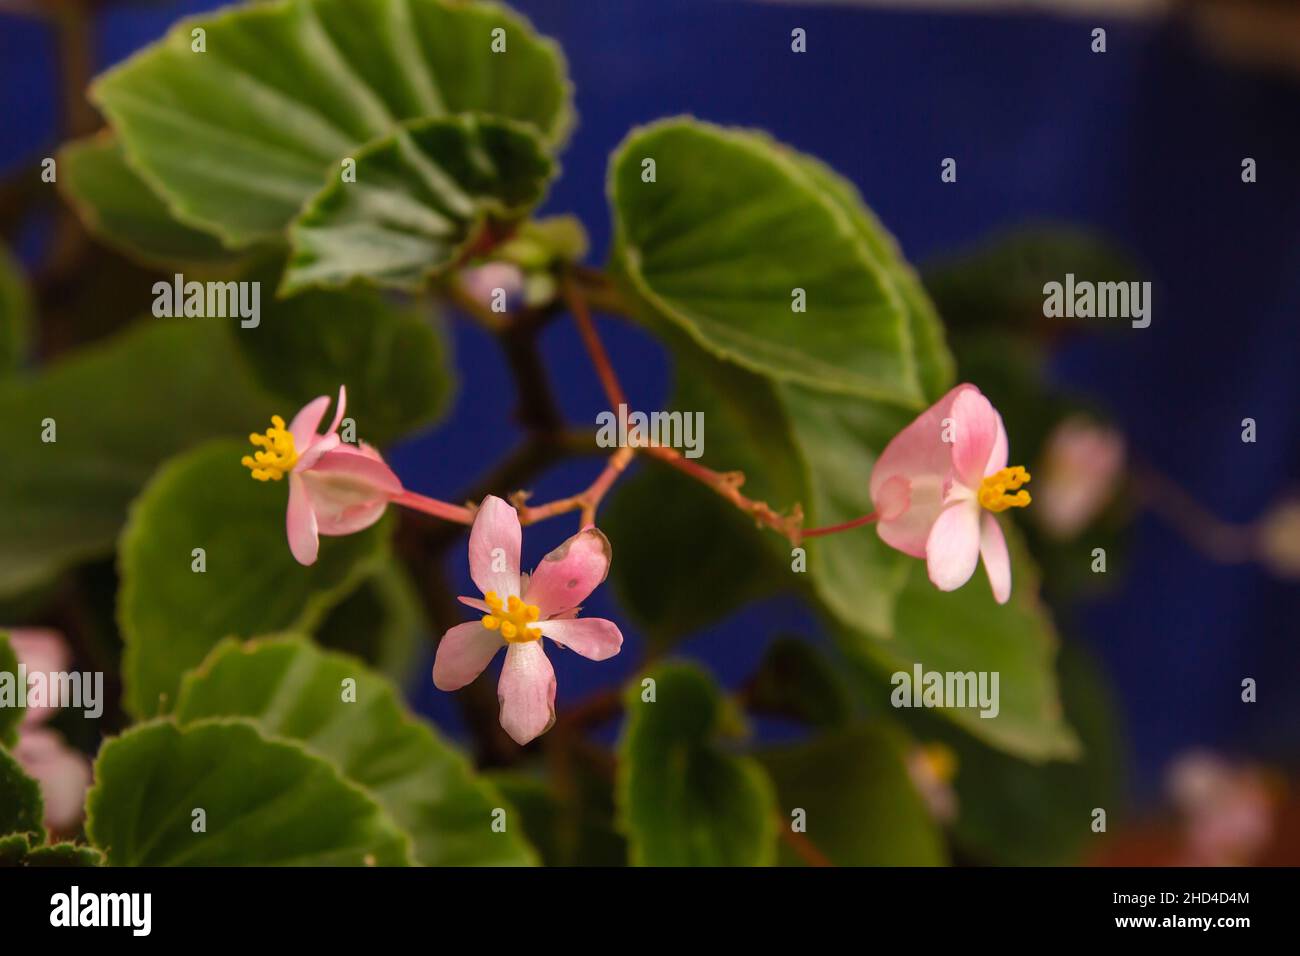 Begonia cucullata plant known as wax begonia pink flowers close up Stock Photo